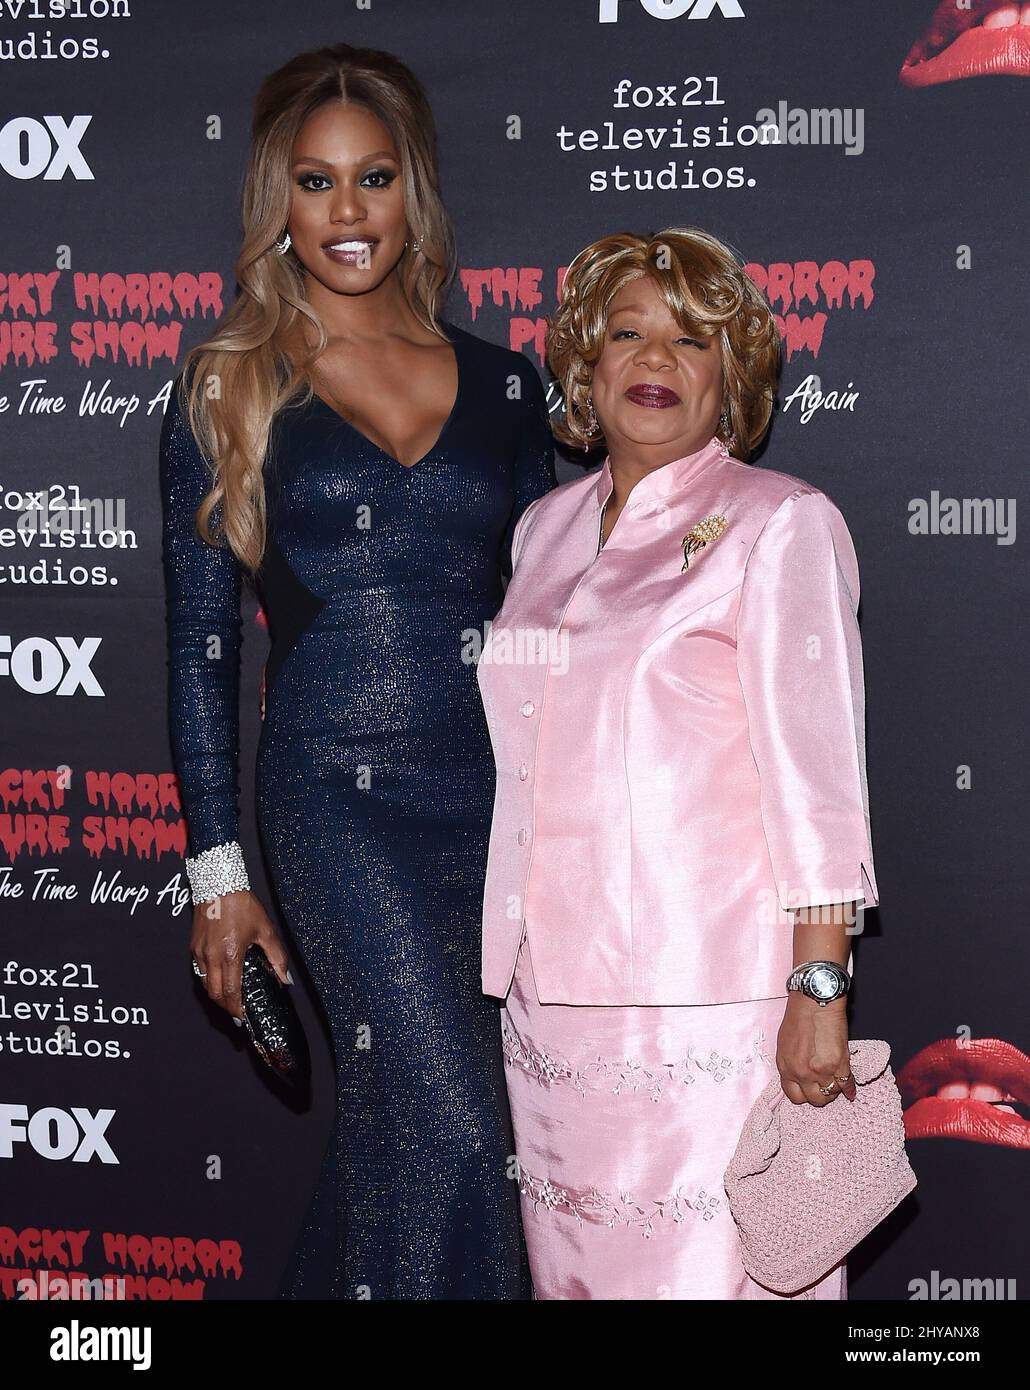 Laverne Cox and Gloria Cox attending the Rocky Horror Picture Show: Let's Do The Time Warp Again Premiere held at The Roxy, in Los Angeles, California. Stock Photo